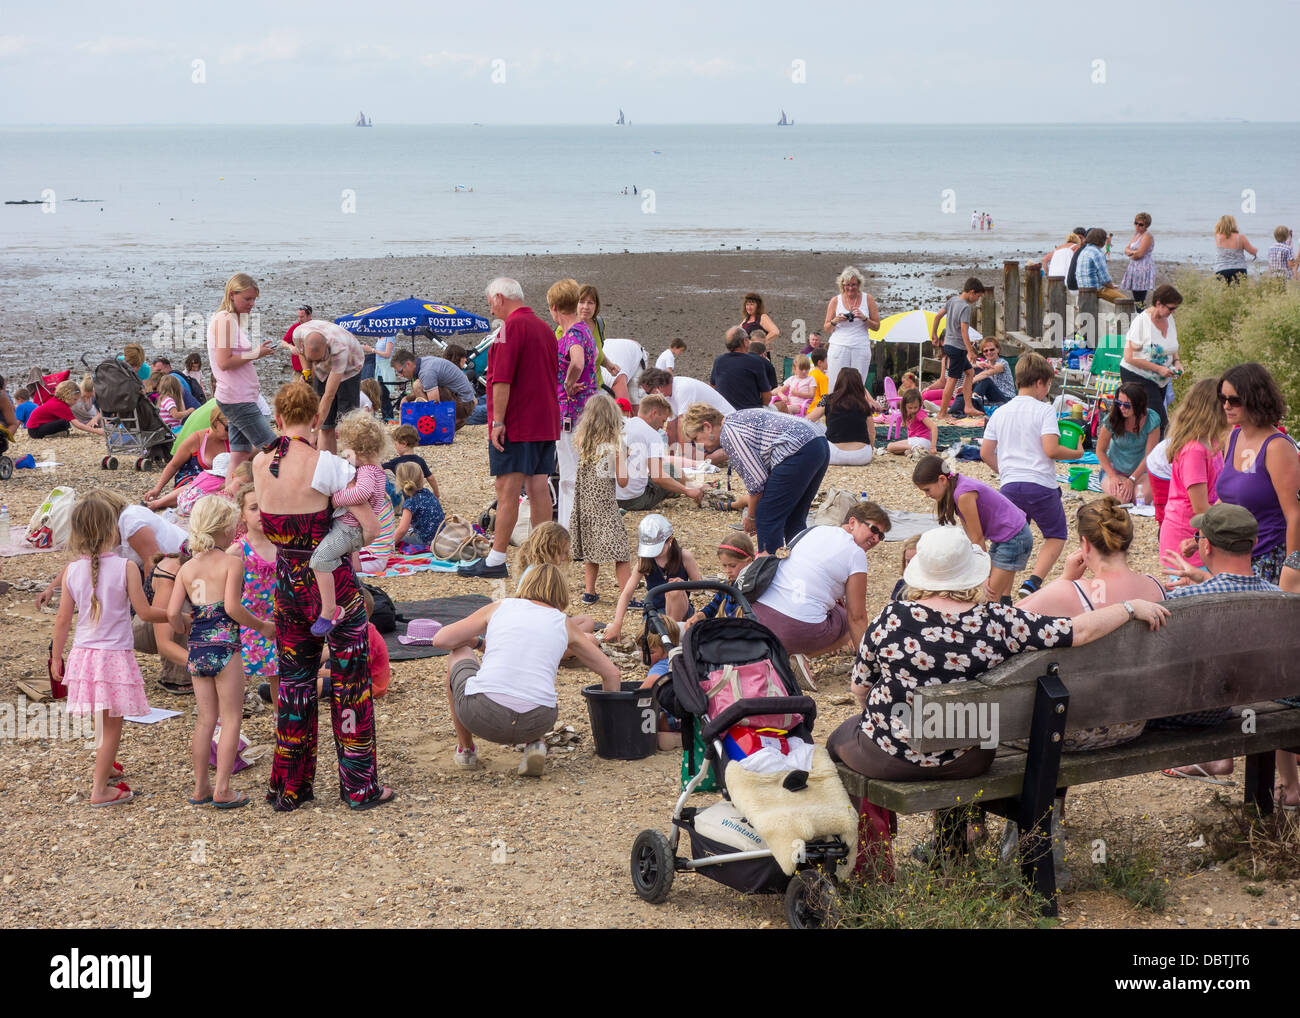 Family Day at the Seaside.  Playing and Relaxing on the beach. Stock Photo